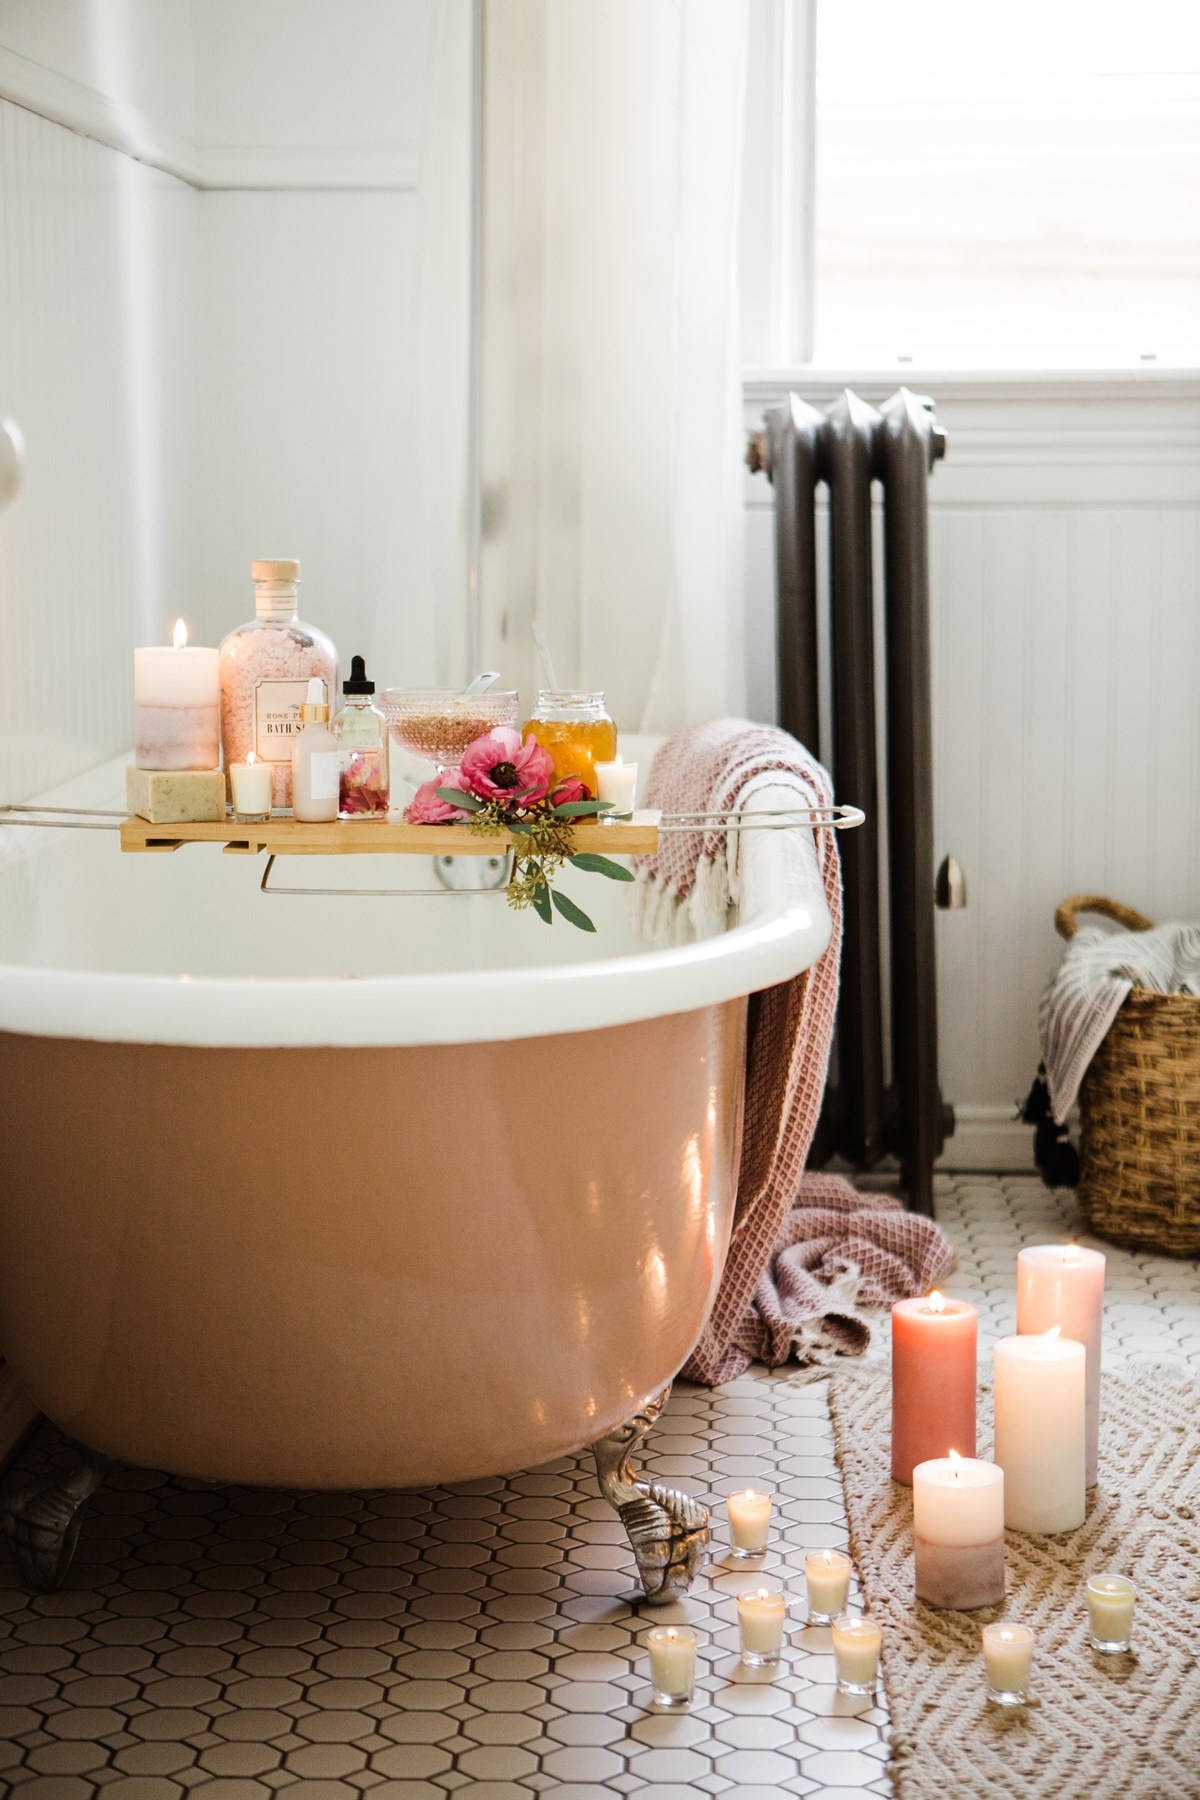 Download Bathtub With Candles And Essentials Wallpaper